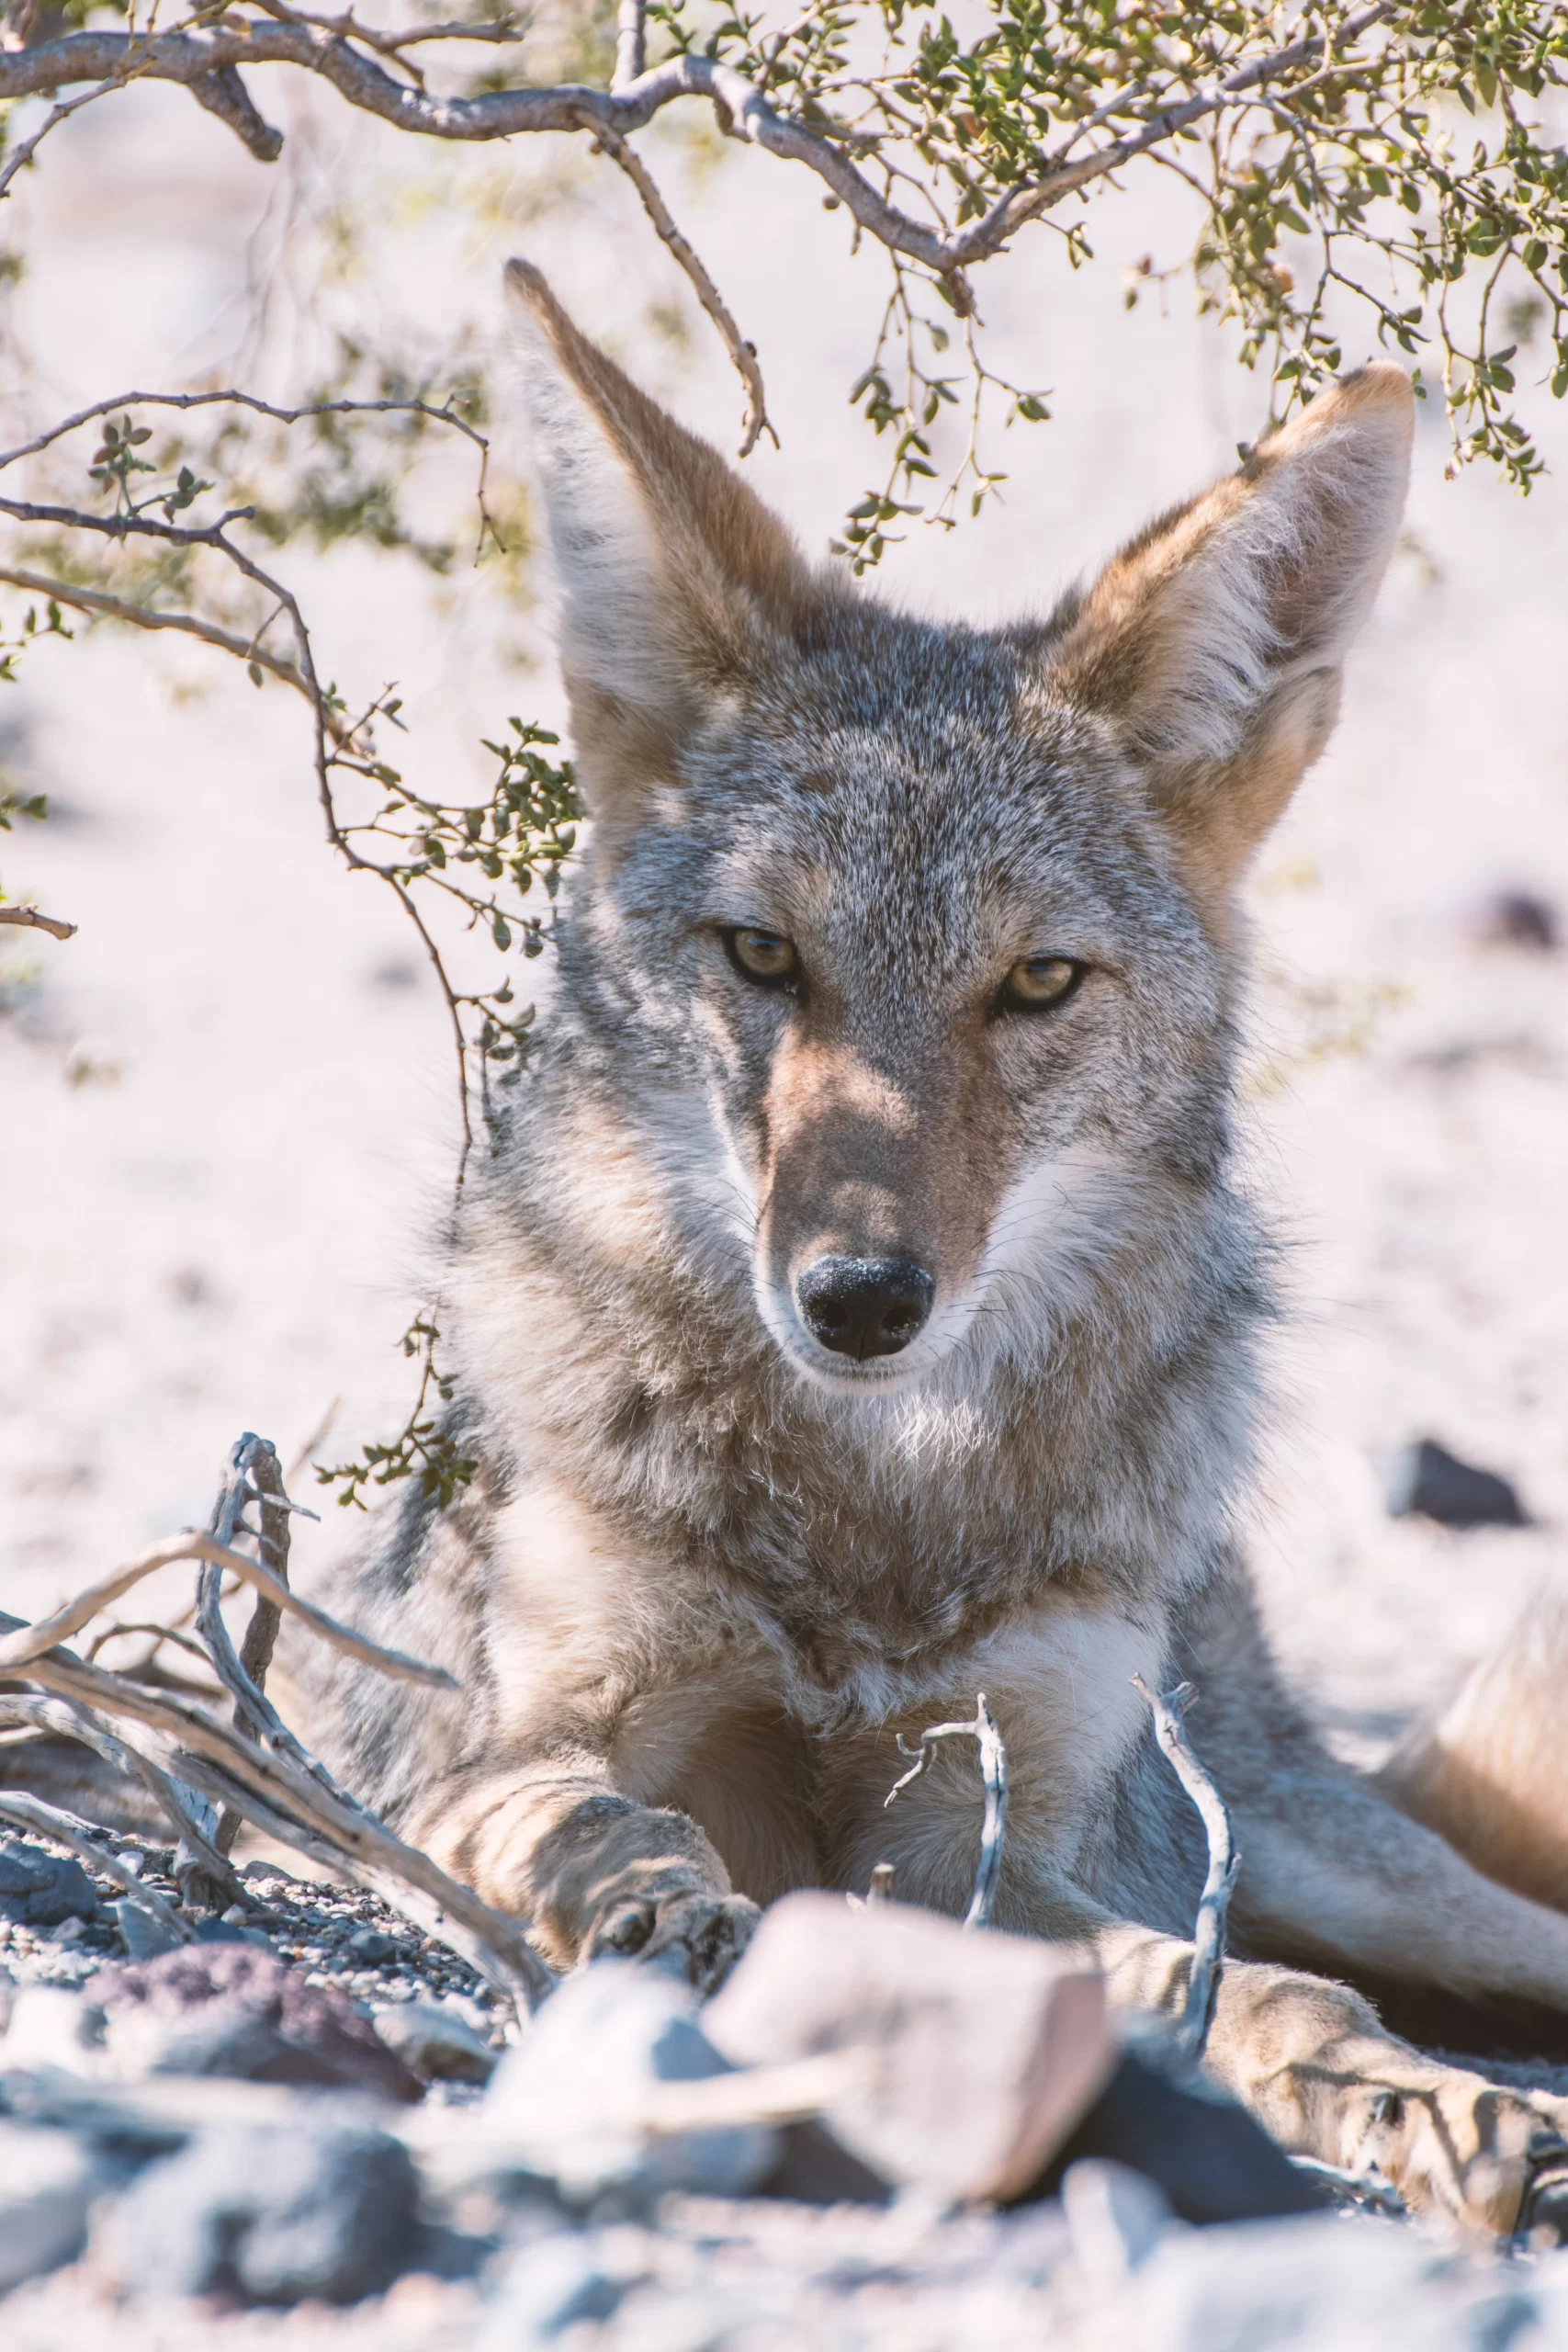 Death Valley National Park, United States Published on September 28, 2017 NIKON CORPORATION, NIKON D5500 Free to use under the Unsplash License We drove trough a desert in Death Valley as we found three coyotes relaxing from their hunt. As I took the photos the coyote watched me carefully. As he stood up and walked in my directon I had to elude. The situation got even more dangerous as the other two also came in my direction. I watched them carefully and backed out to get back in the car which was about 50 ft behind me. The coyotes followed me. As we drove away the coyotes still watched us.